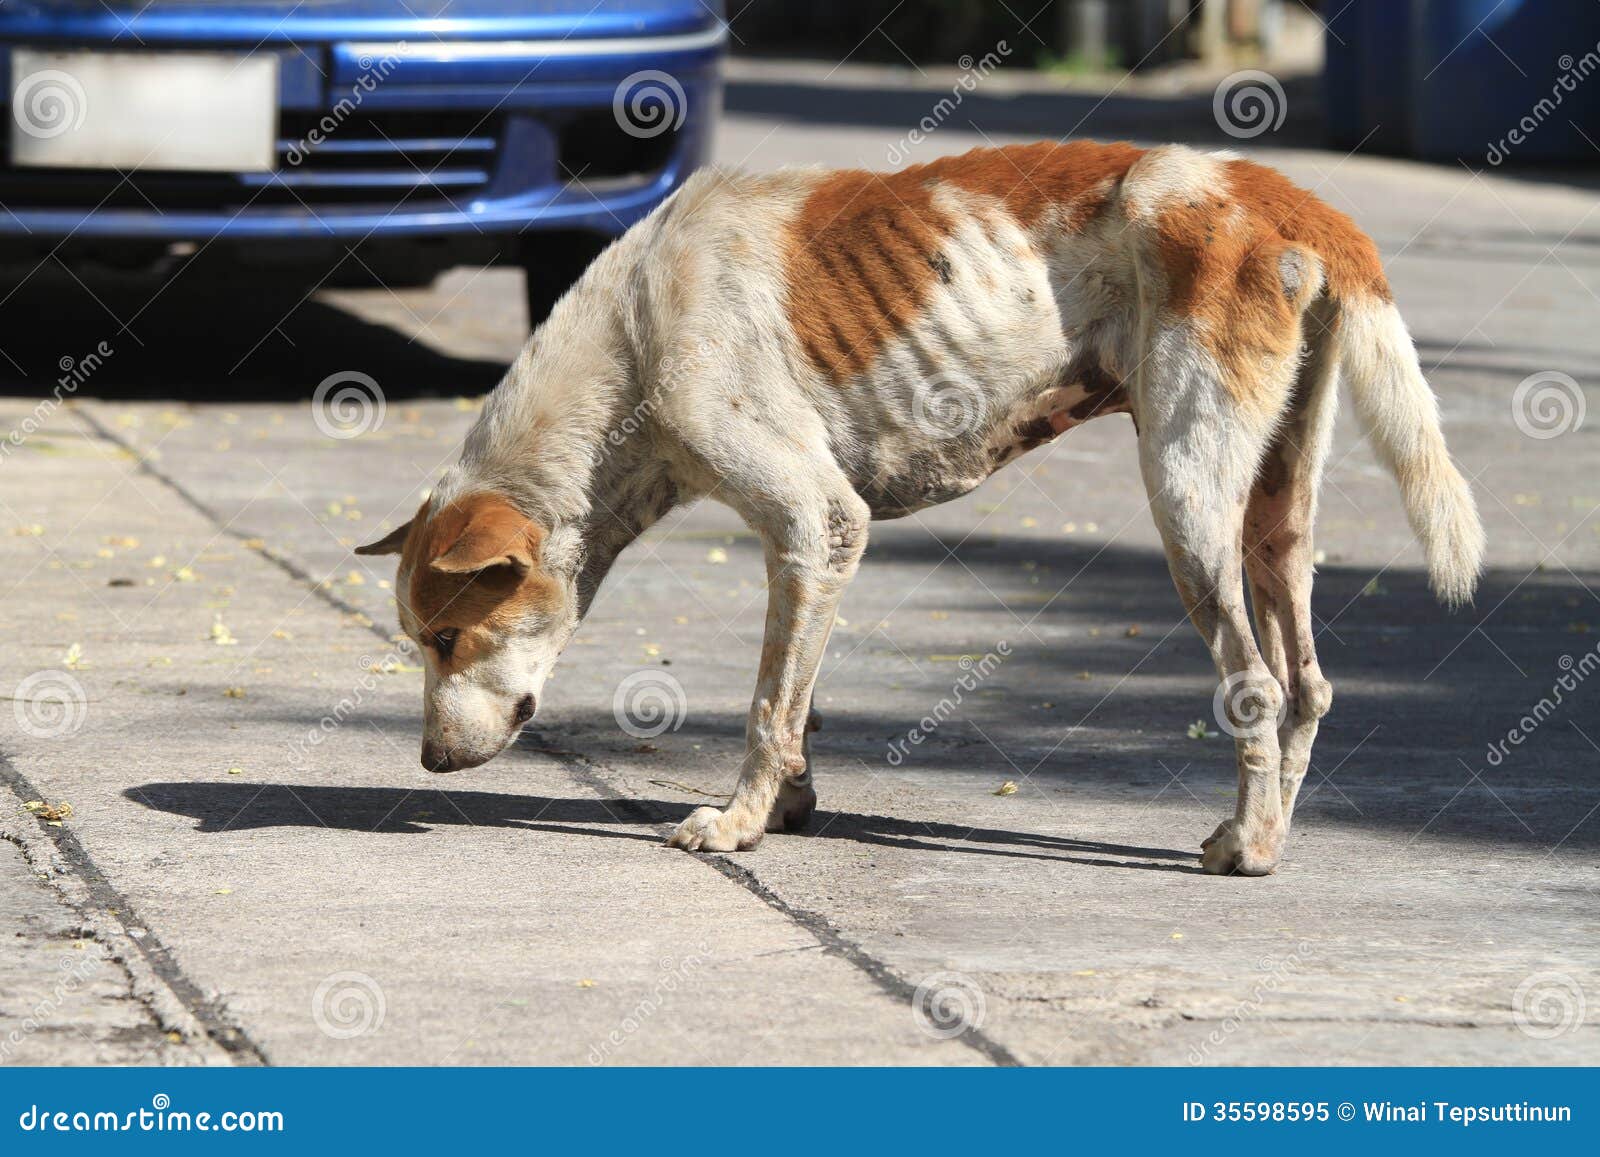 homeless dog on the road